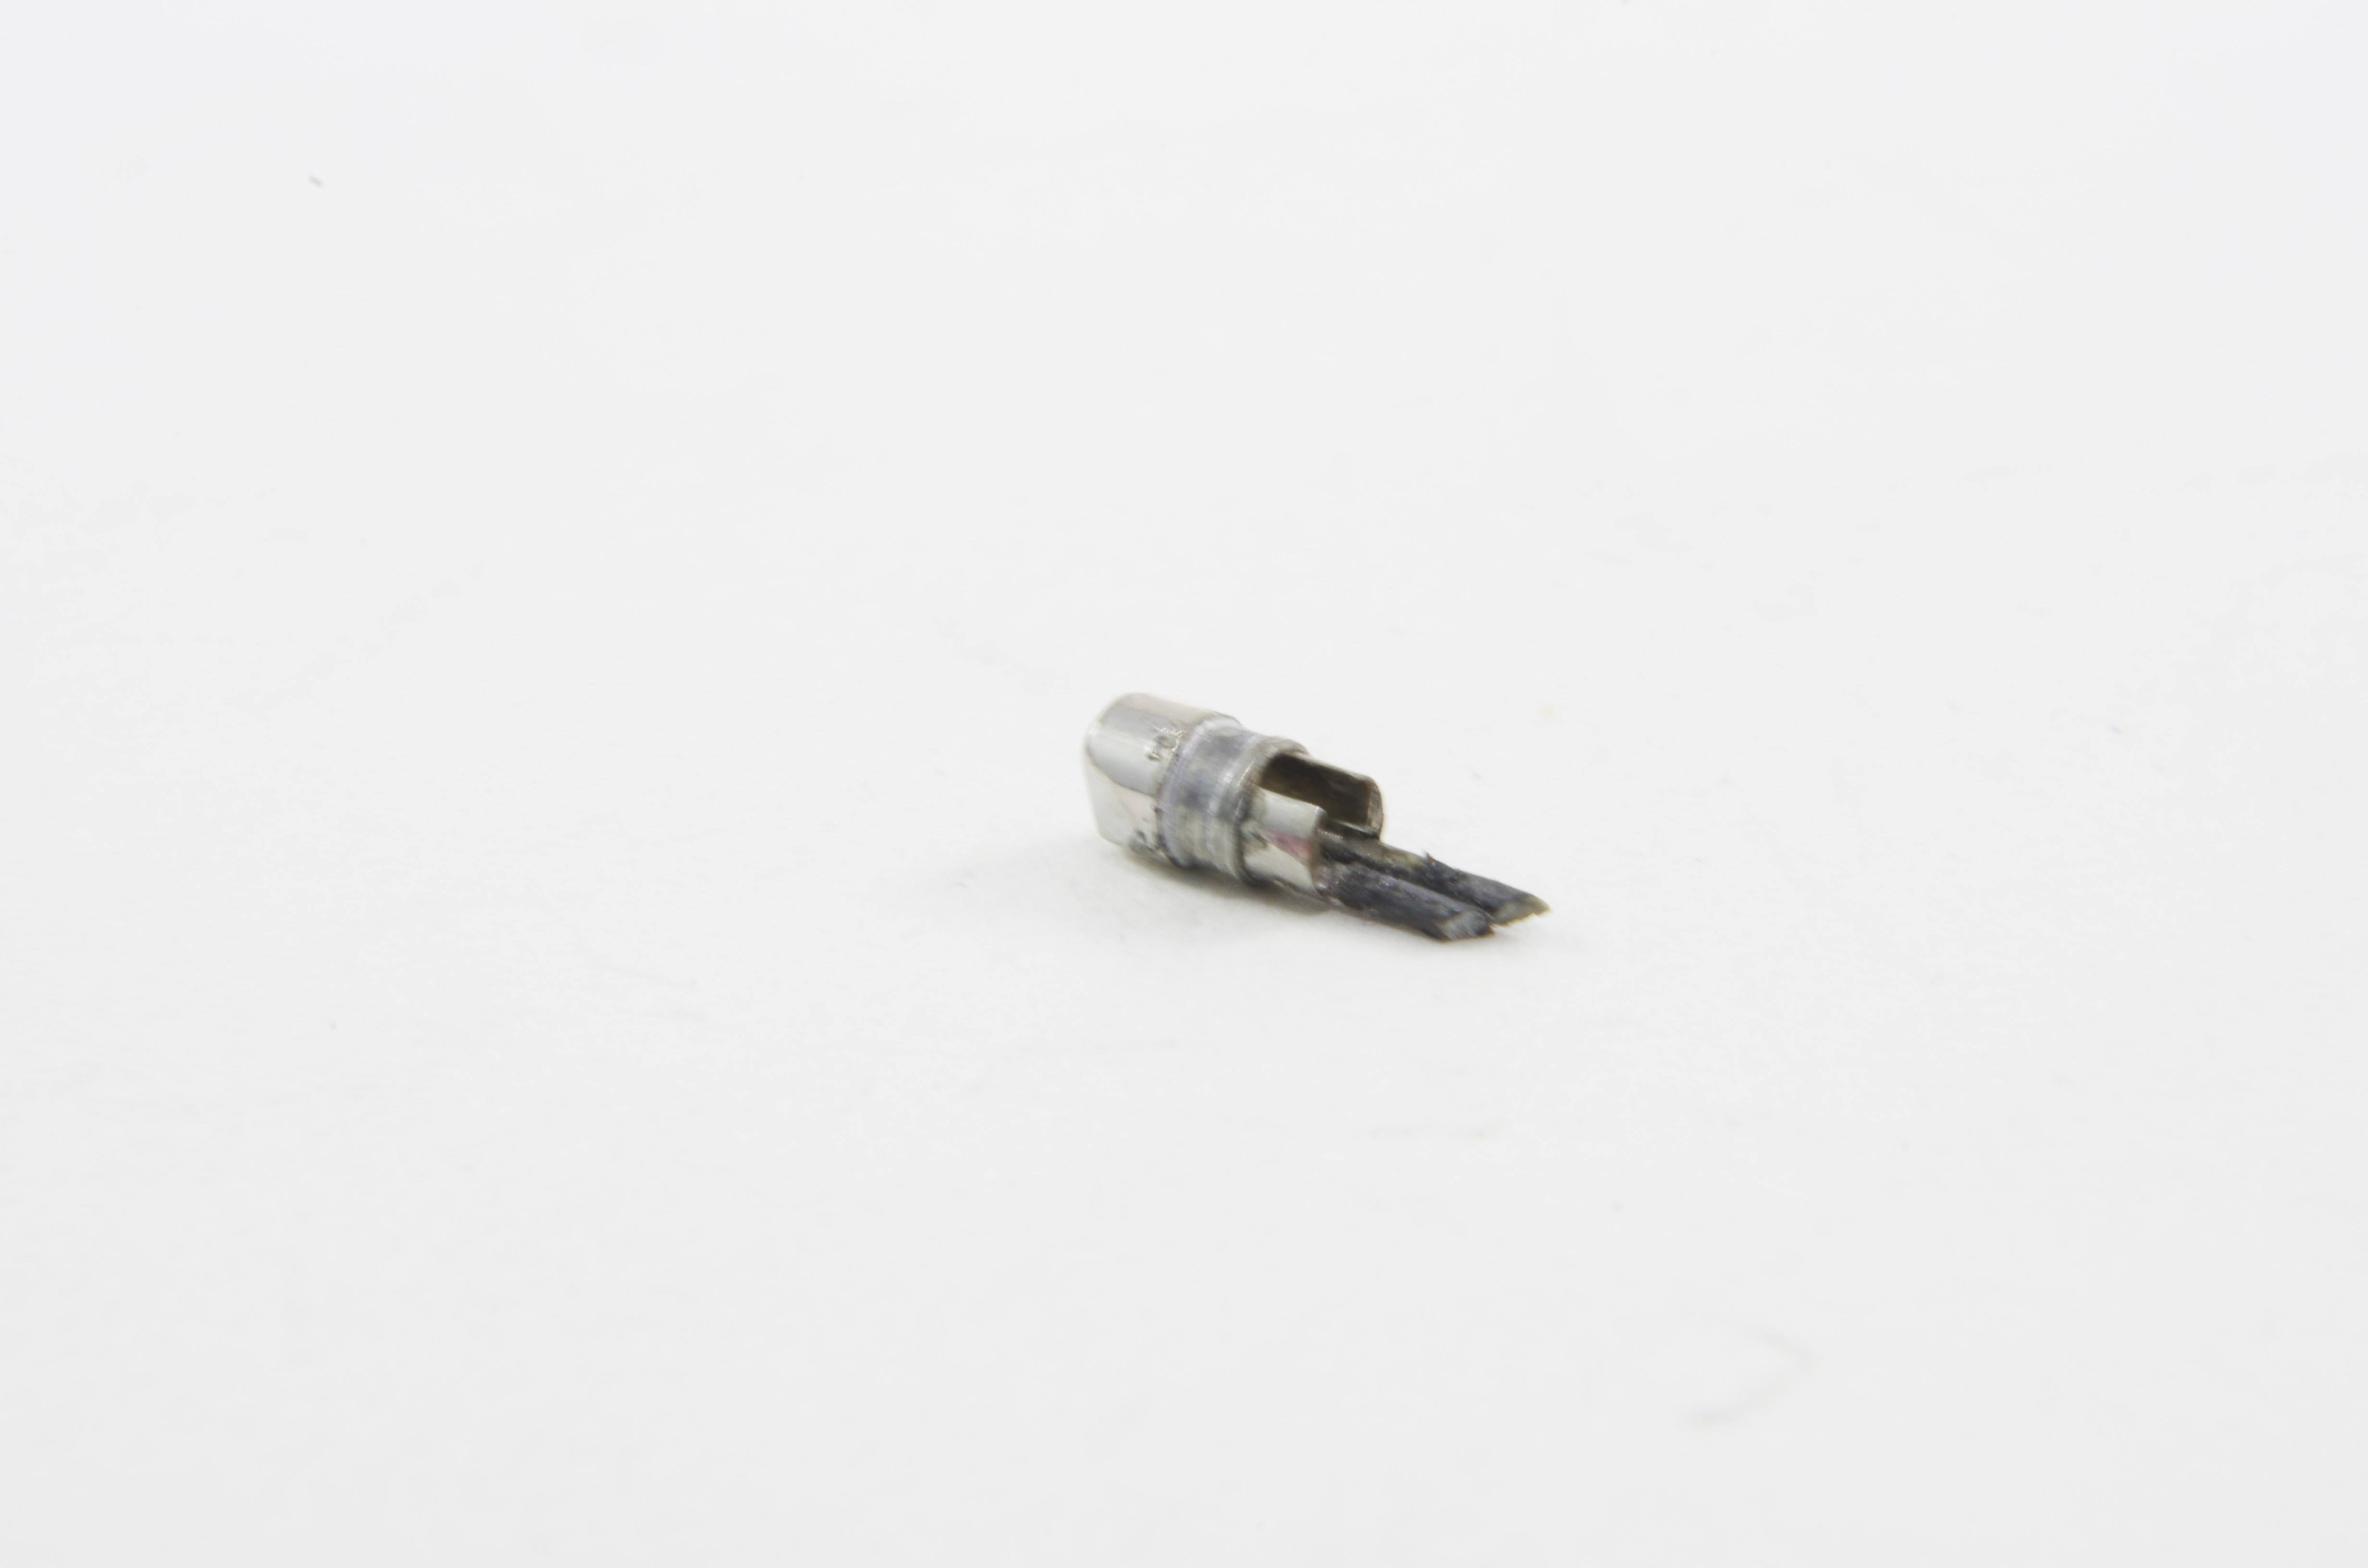 OEM Distal Tip with Lenses, C-Cover, and Objective Stack - URF-P3, CHF-CB30L